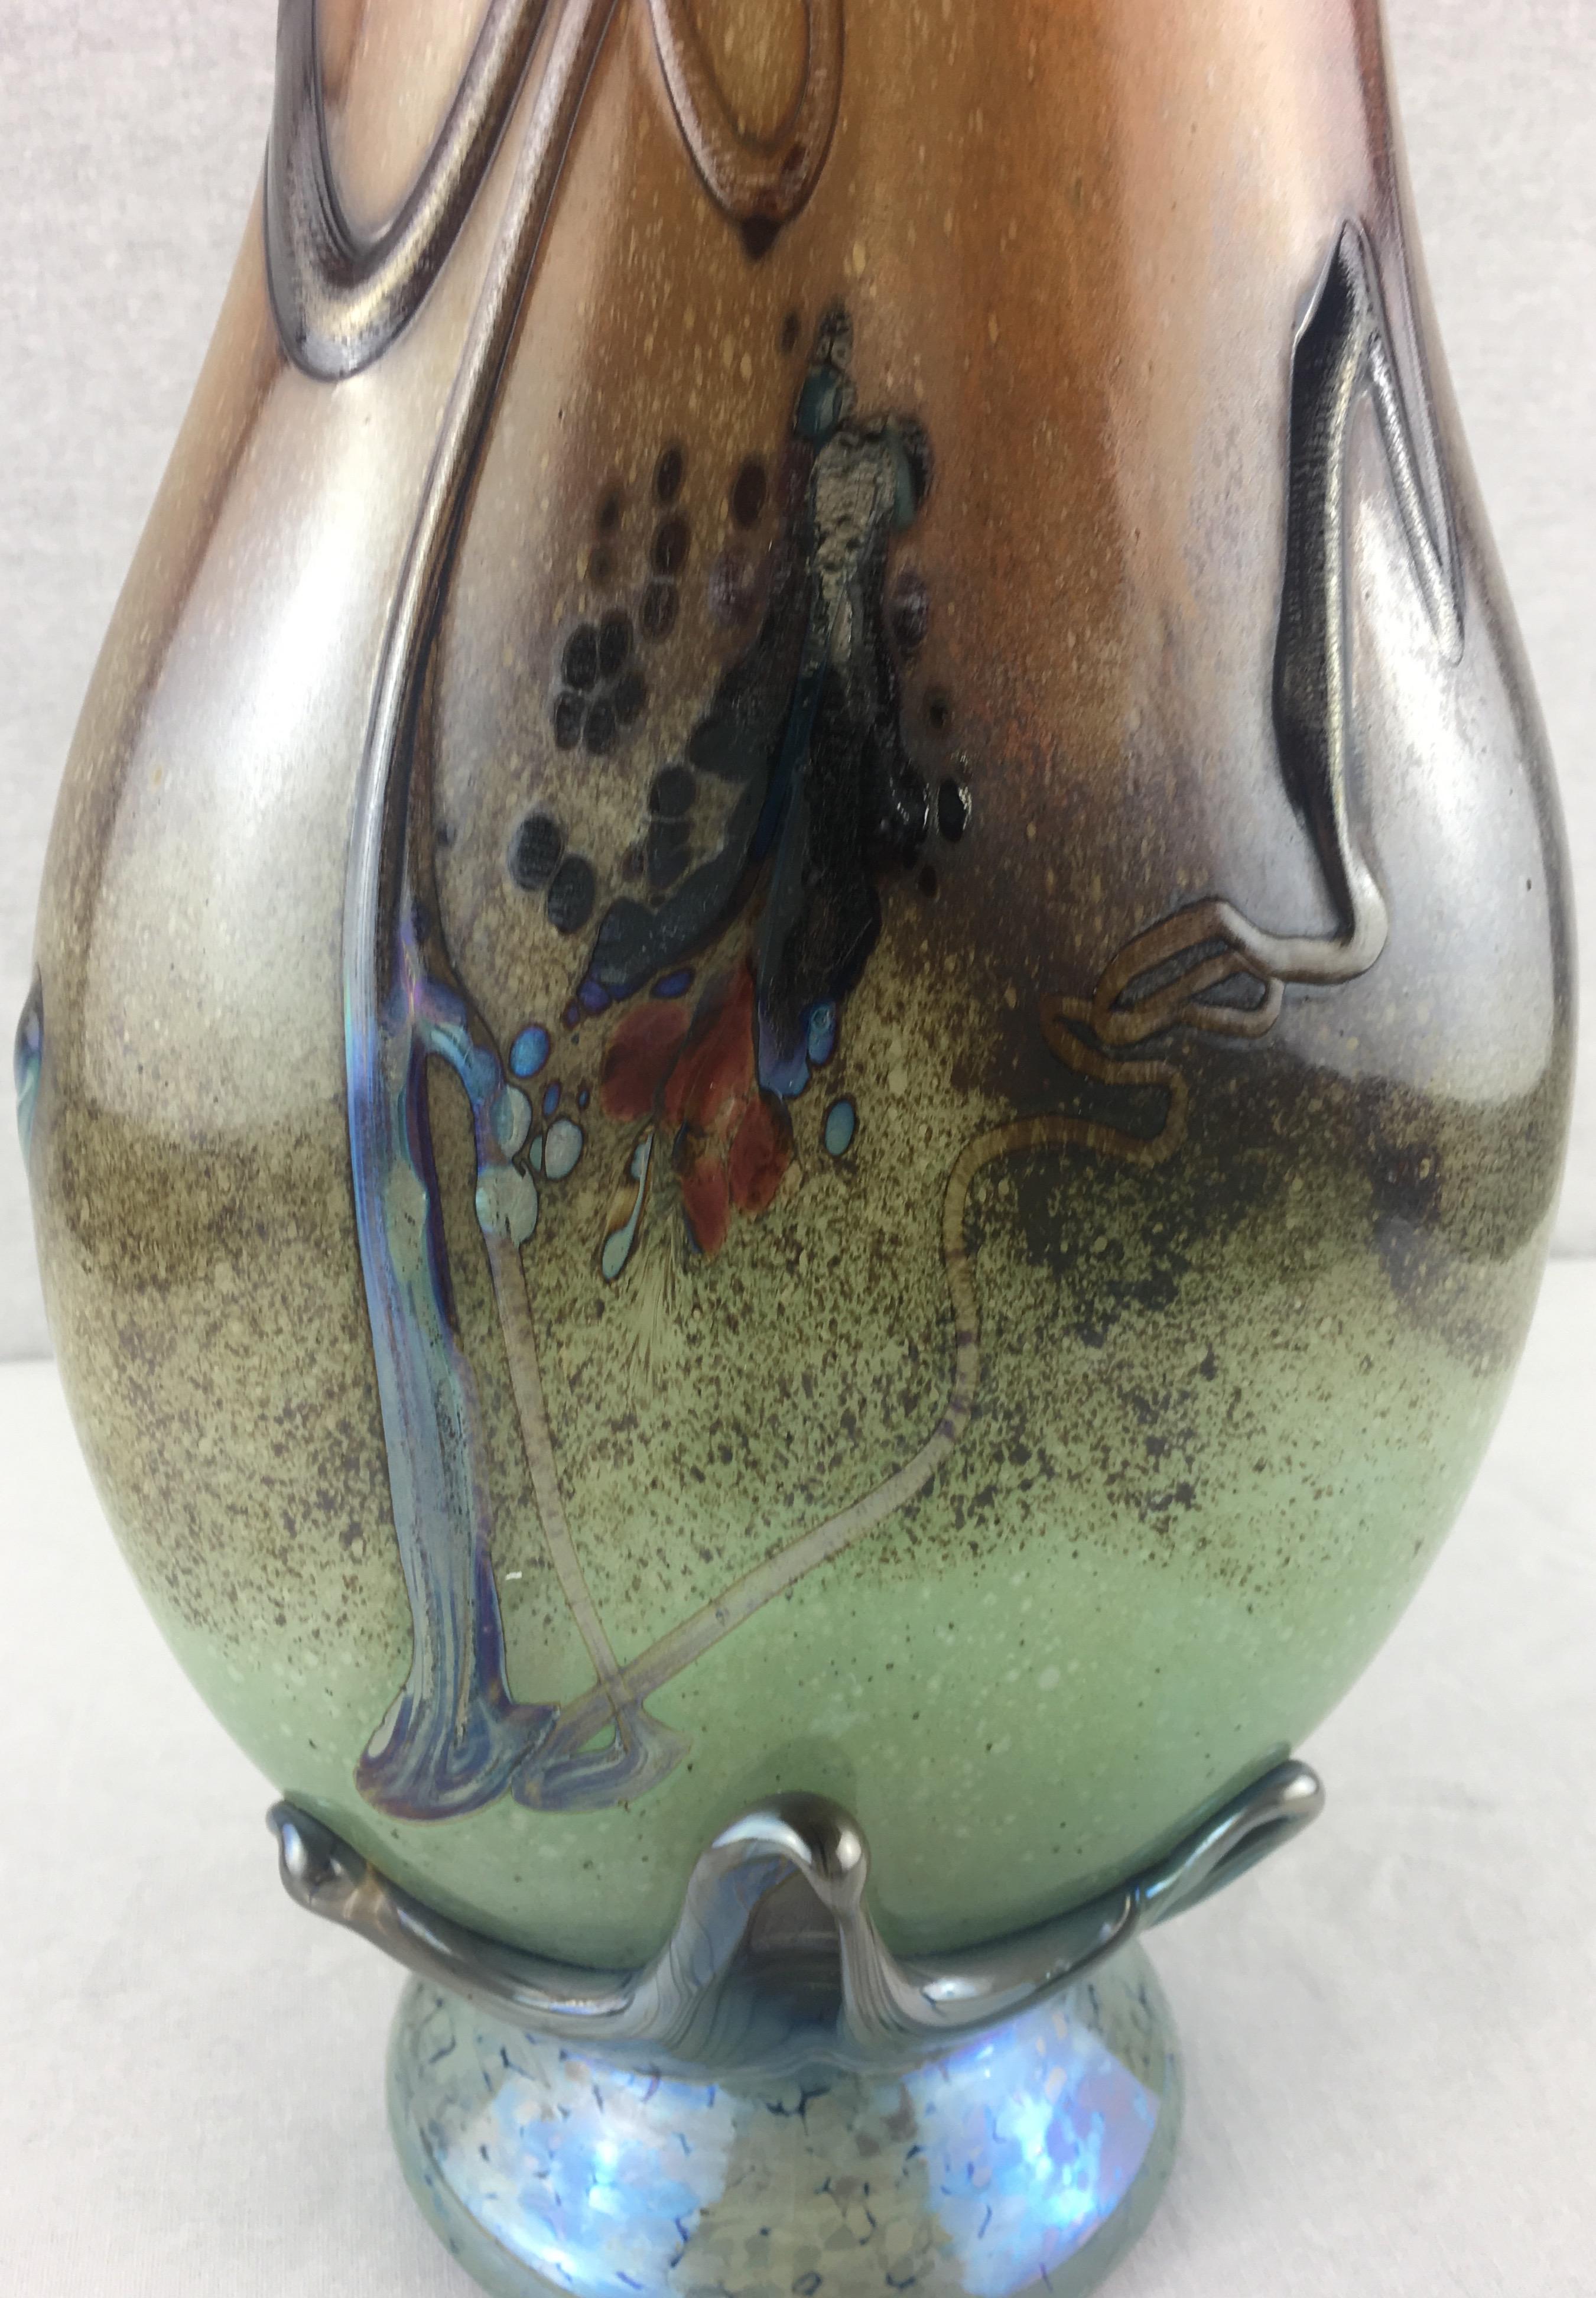 Hand-Painted Art Nouveau Style Vase signed Guyot and Aconito from Biot, France